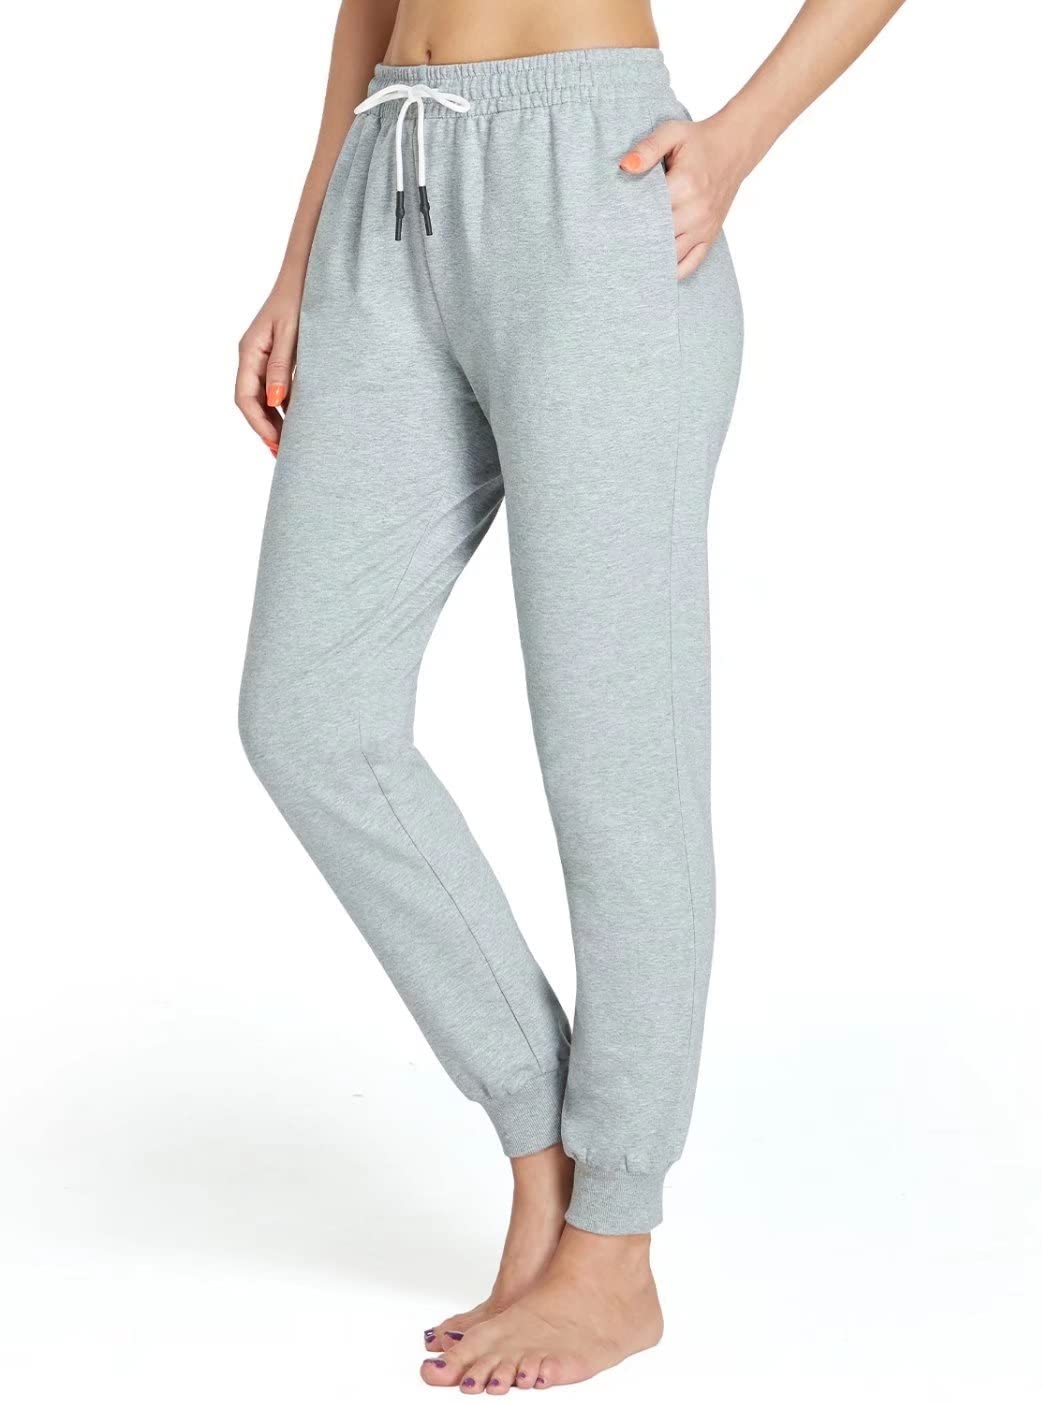 Made in Maryland Soft/Cozy Sweatpants Teenager Jogger Pants for Teen Girls 